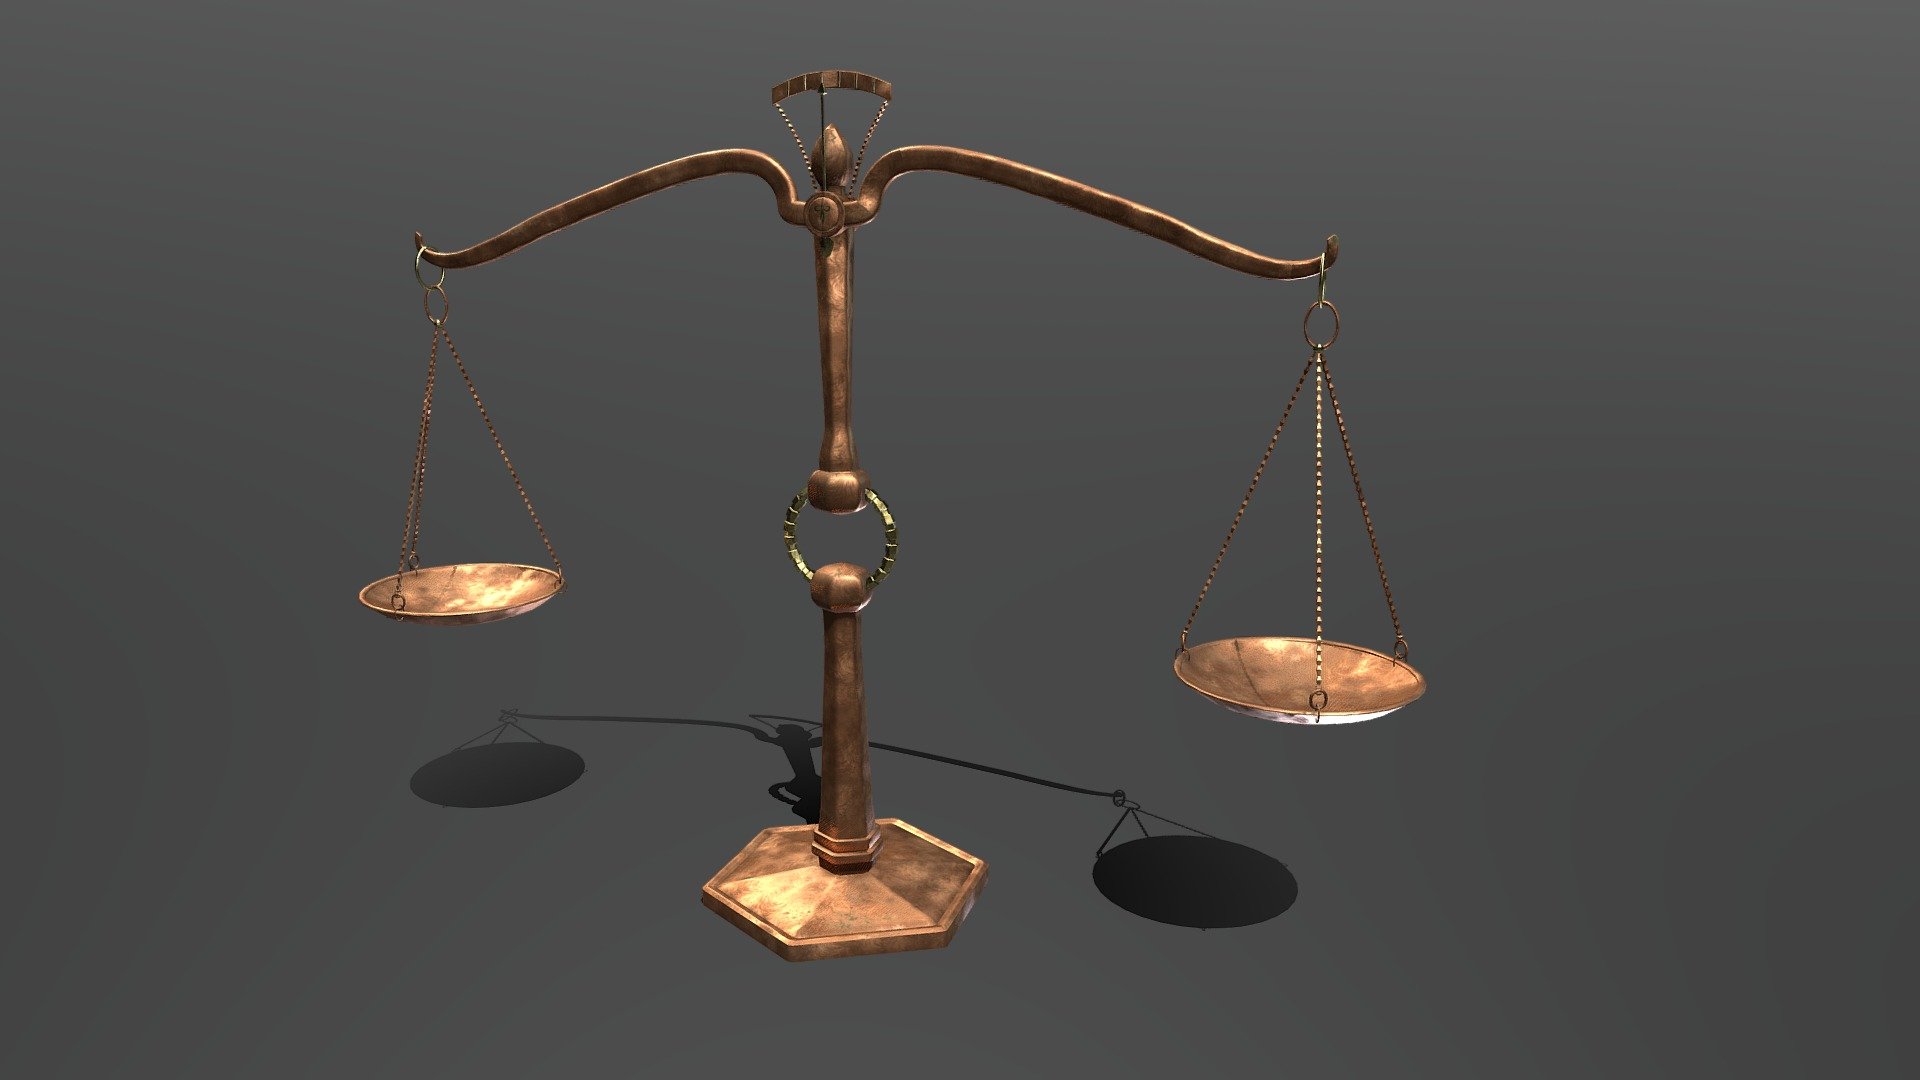 Created in blender and painted in substance. Golden medieval balance scales 3d model